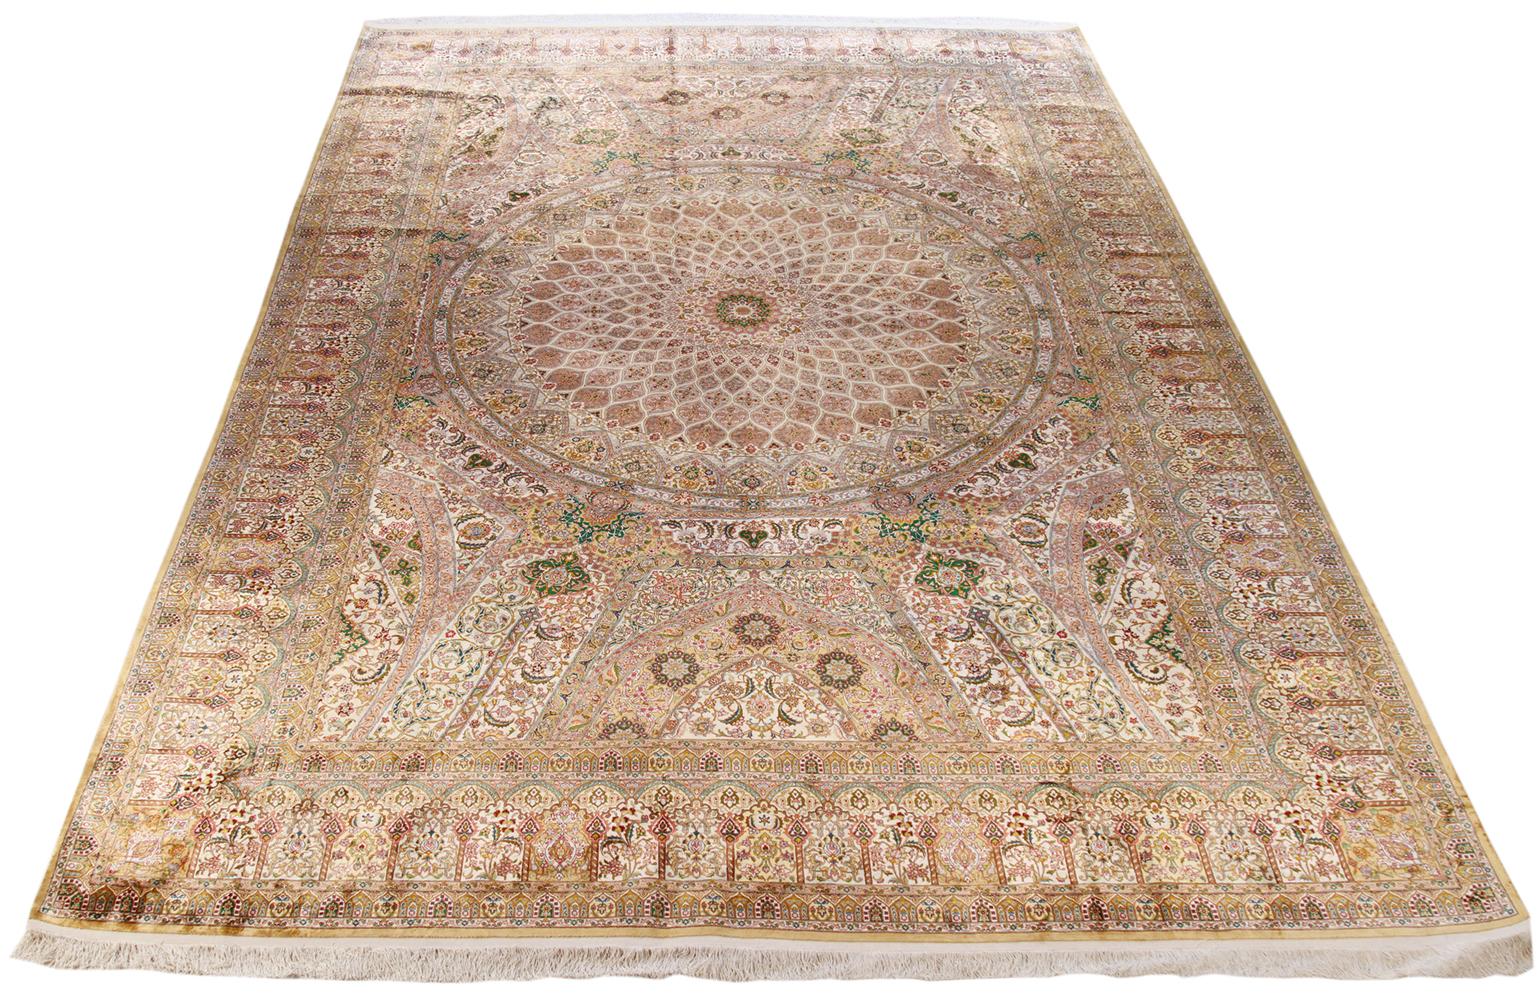 New Persian rug handwoven from the finest silk and colored with all-natural vegetable dyes that are safe for humans and pets. It’s a traditional Ghom Silk design featuring green and gold floral details. It’s a stunning piece for decorating modern,